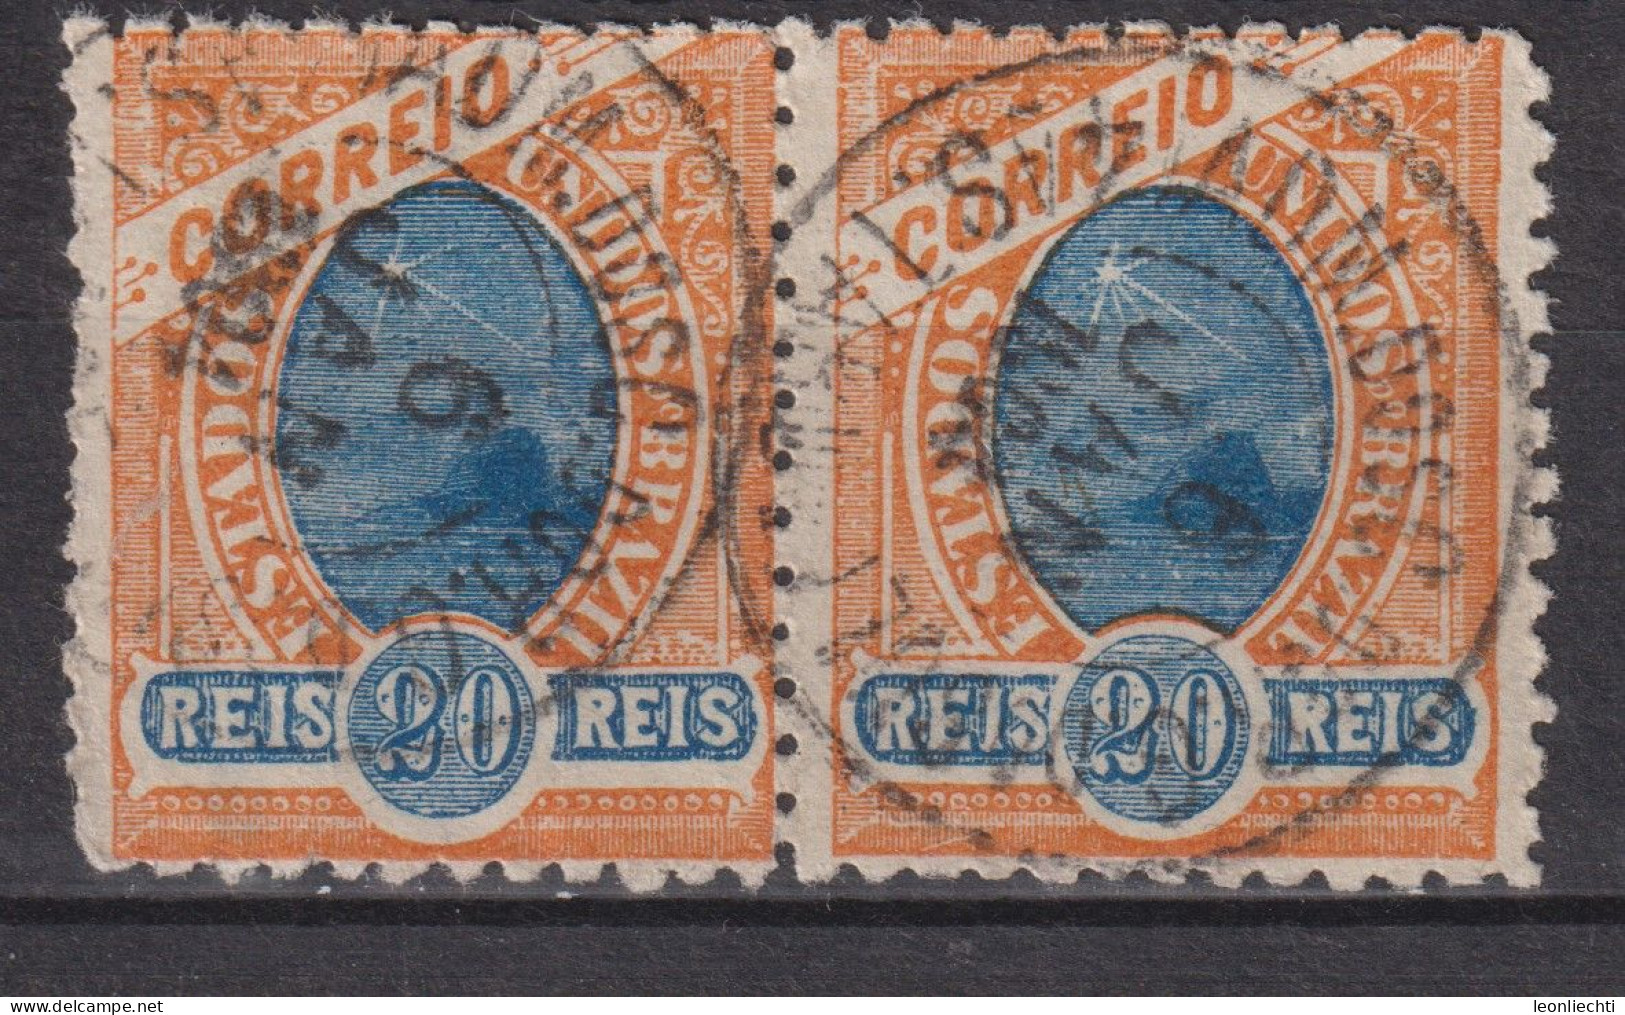 1905 Brasilien Mi:BR 155, Sn:BR 167, Yt:BR 120, Sugarloaf Mountain,Republican Dawn With Watermark - Used Stamps